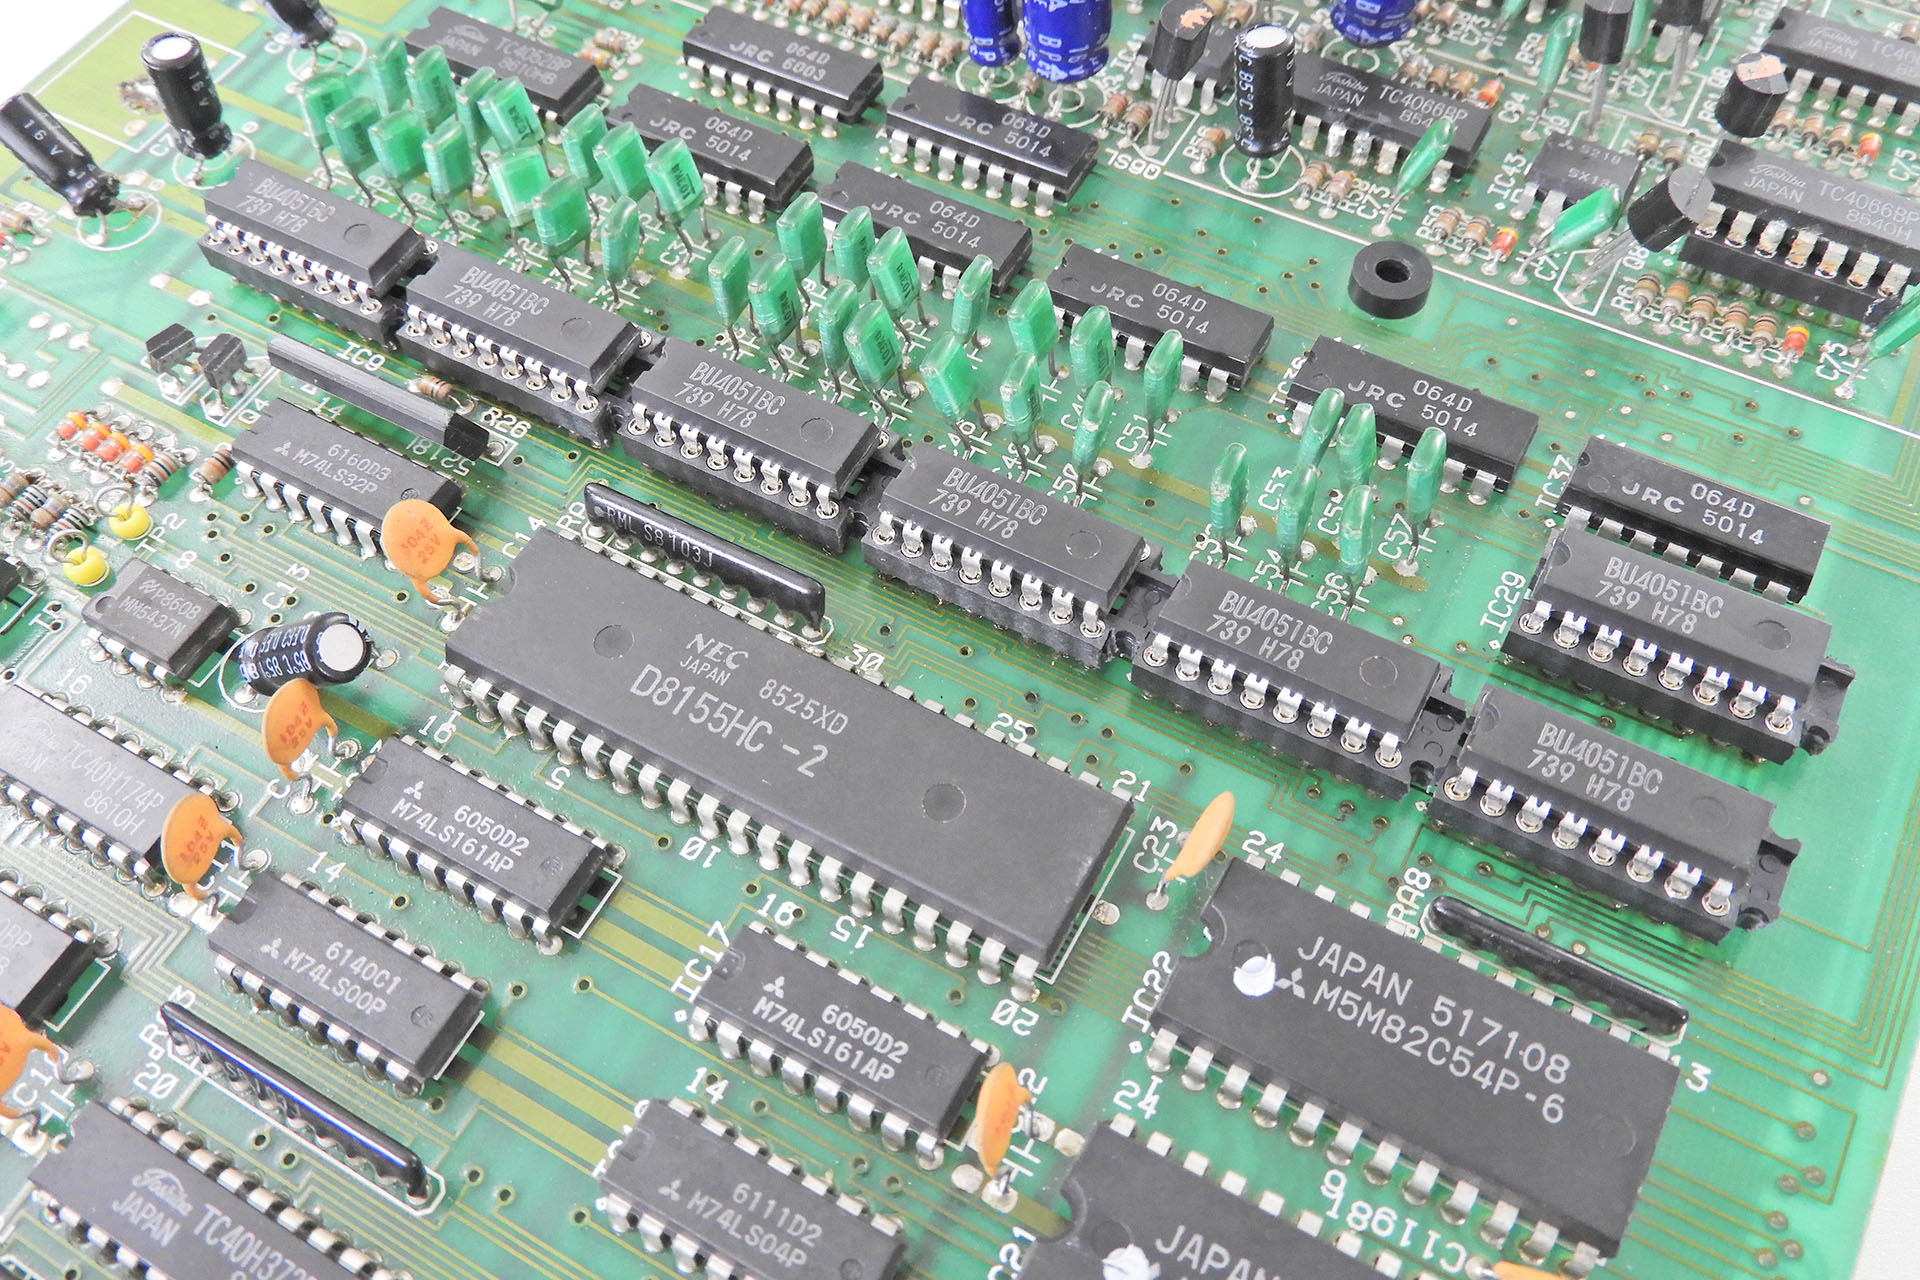 Customer Replaced 4051s on Roland JX-10 Module Board